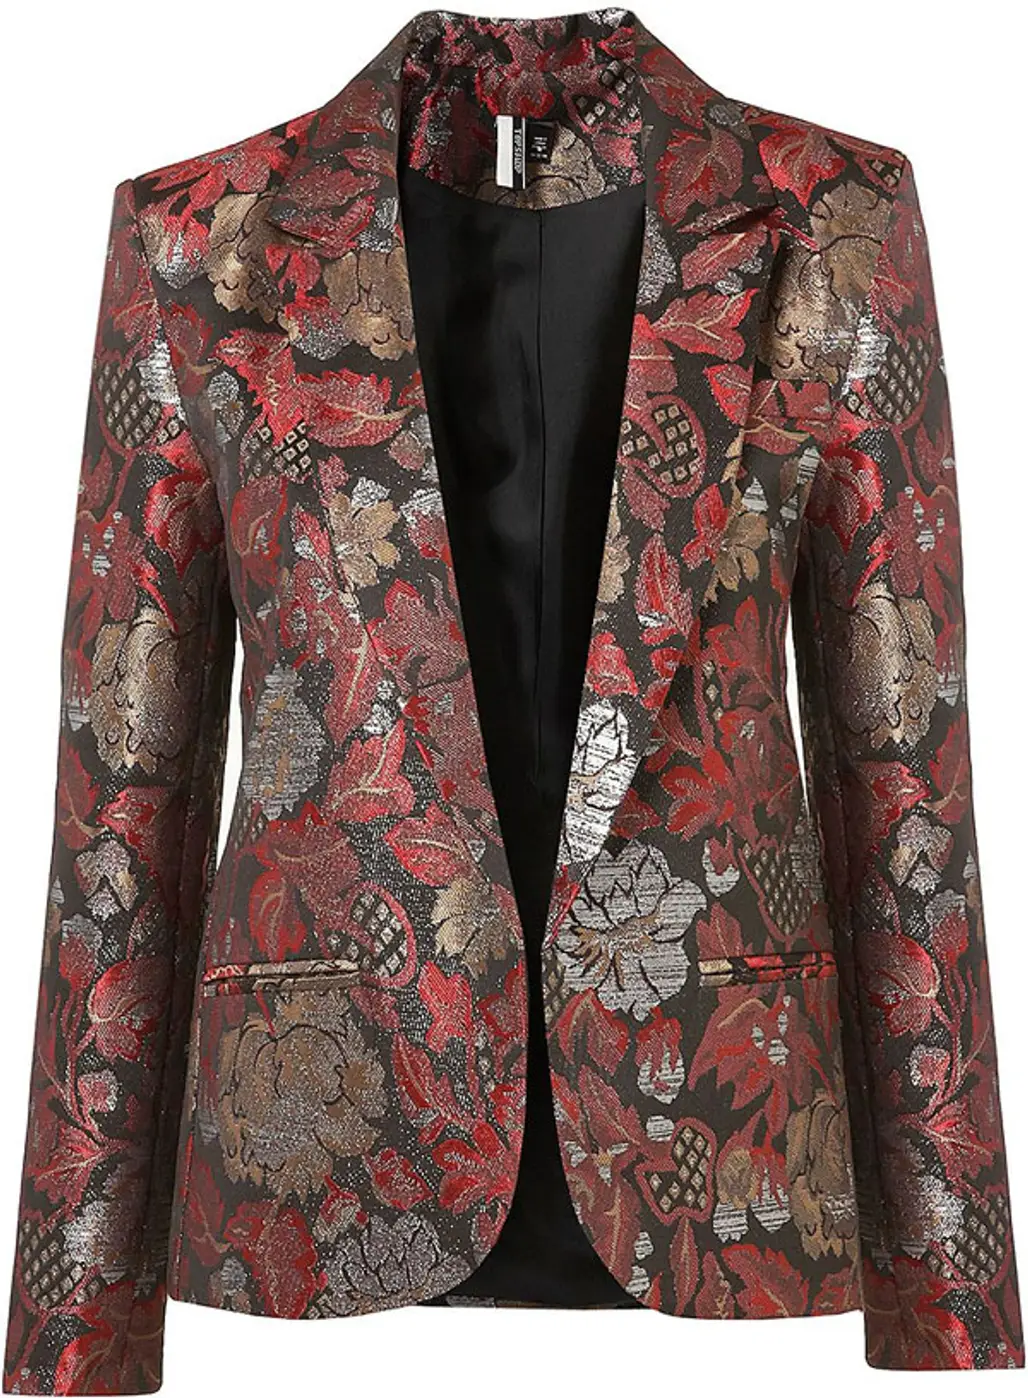 8 Opulent Blazers to Glam up Your Outfit ...